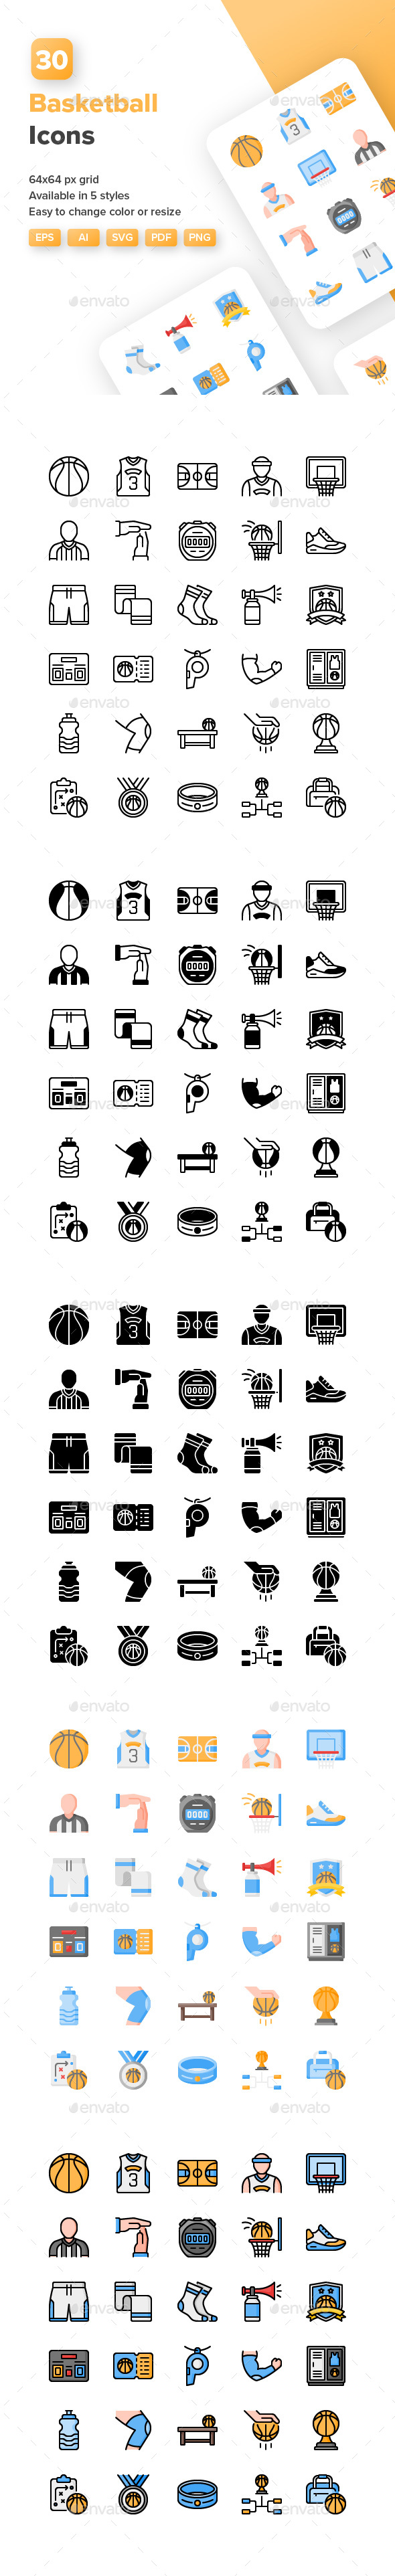 [DOWNLOAD]Basketball Icons